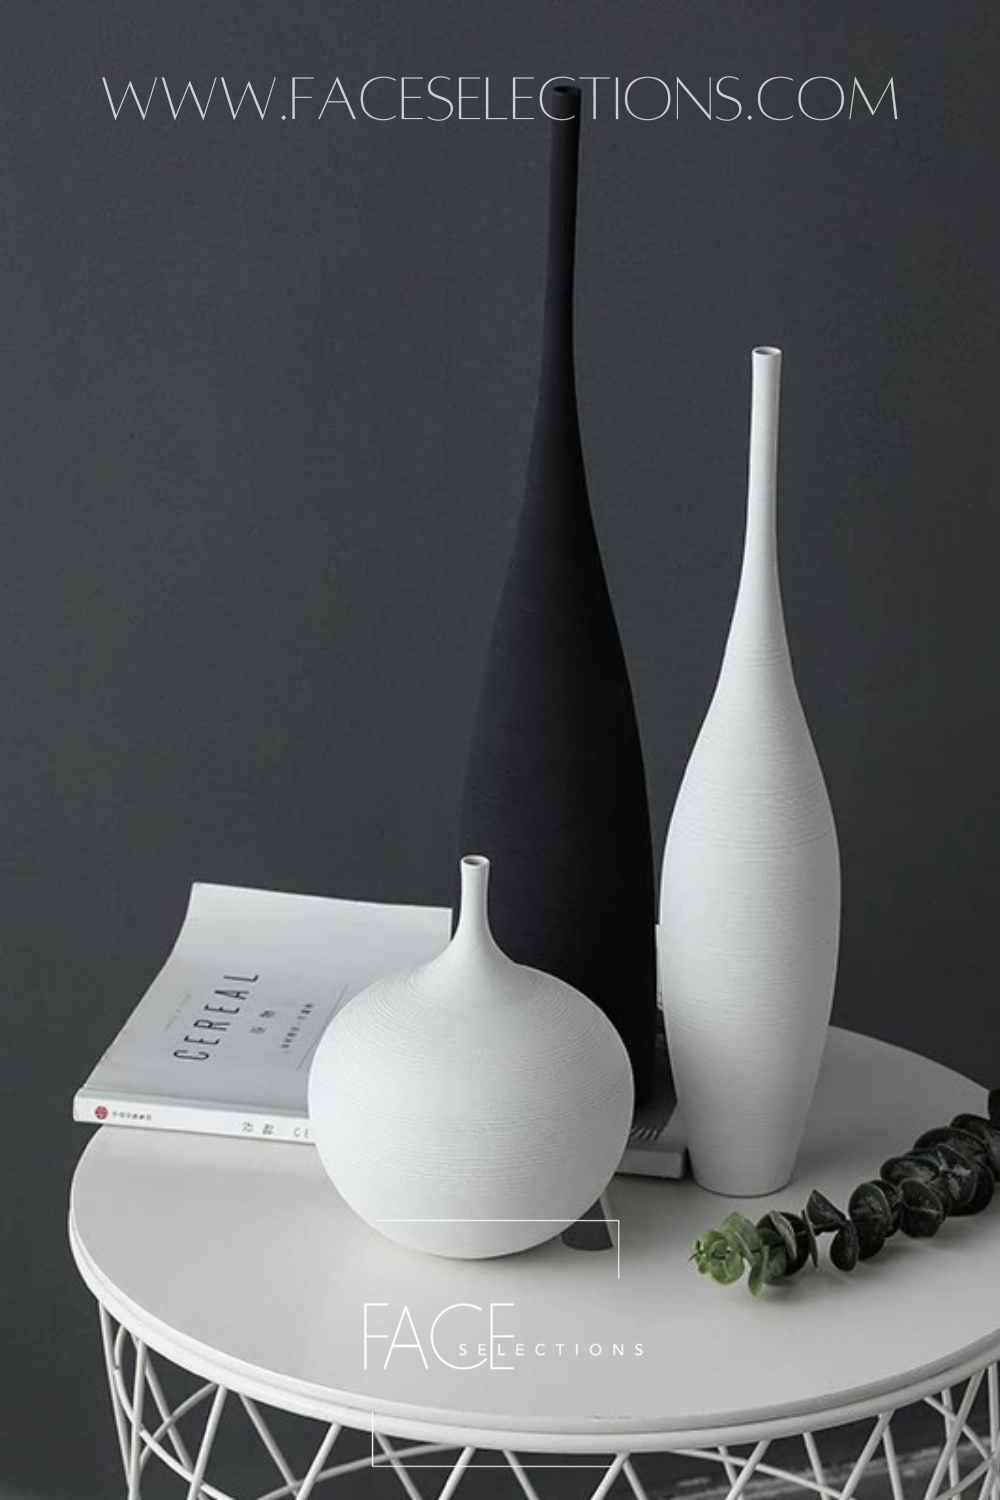 7 Ways To Re-Create the Vibe of Any Room with Modern Art Scandinavian Vases